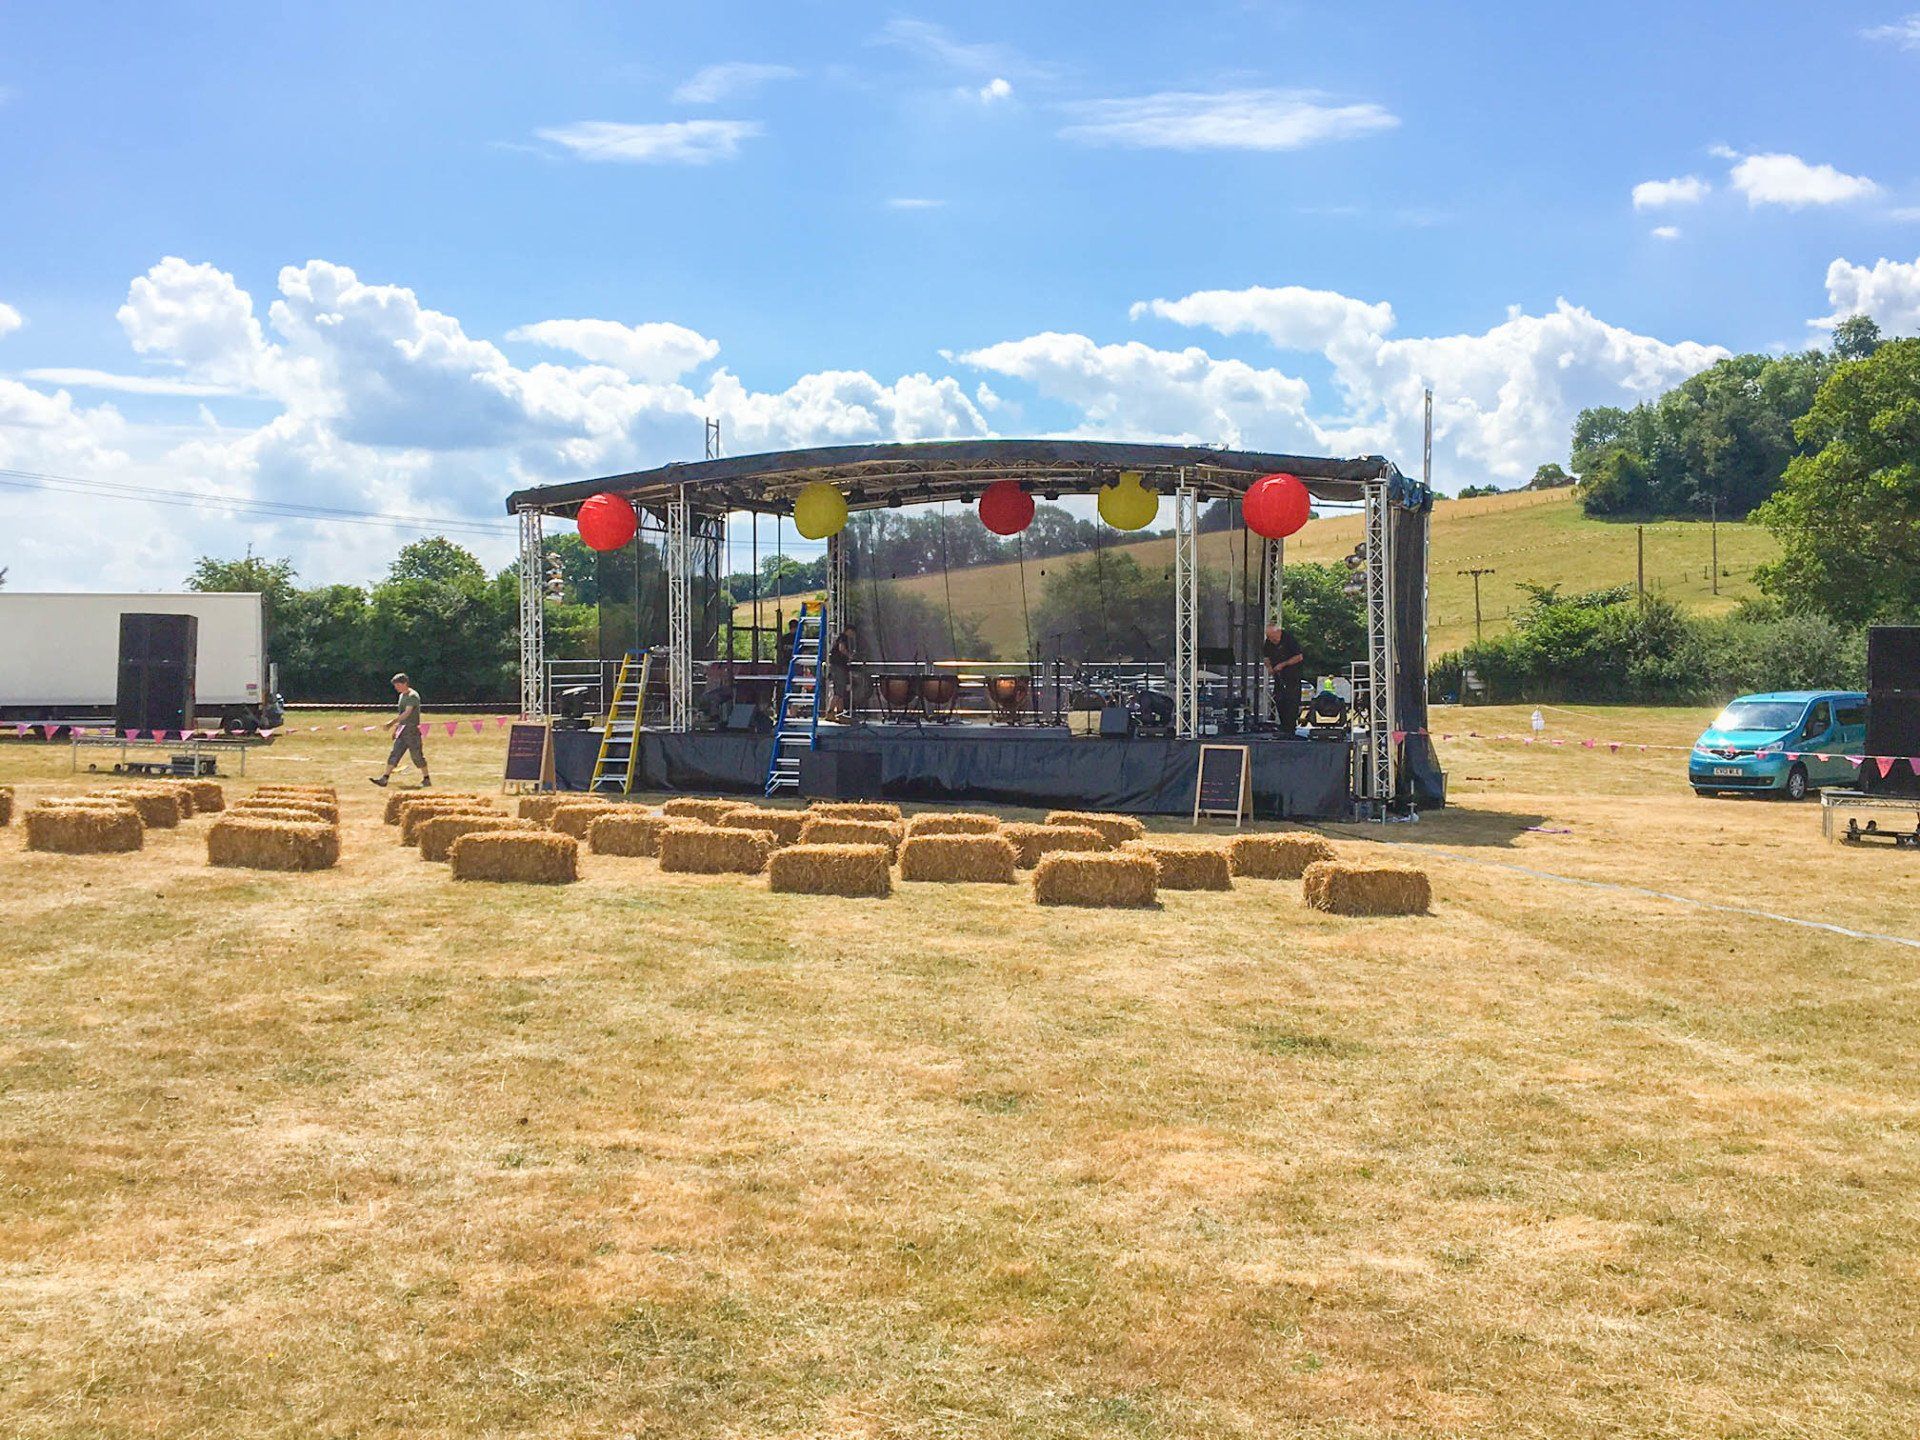 Extra large trailer stage set up for an outdoor event with bunting and hay bails in front of it